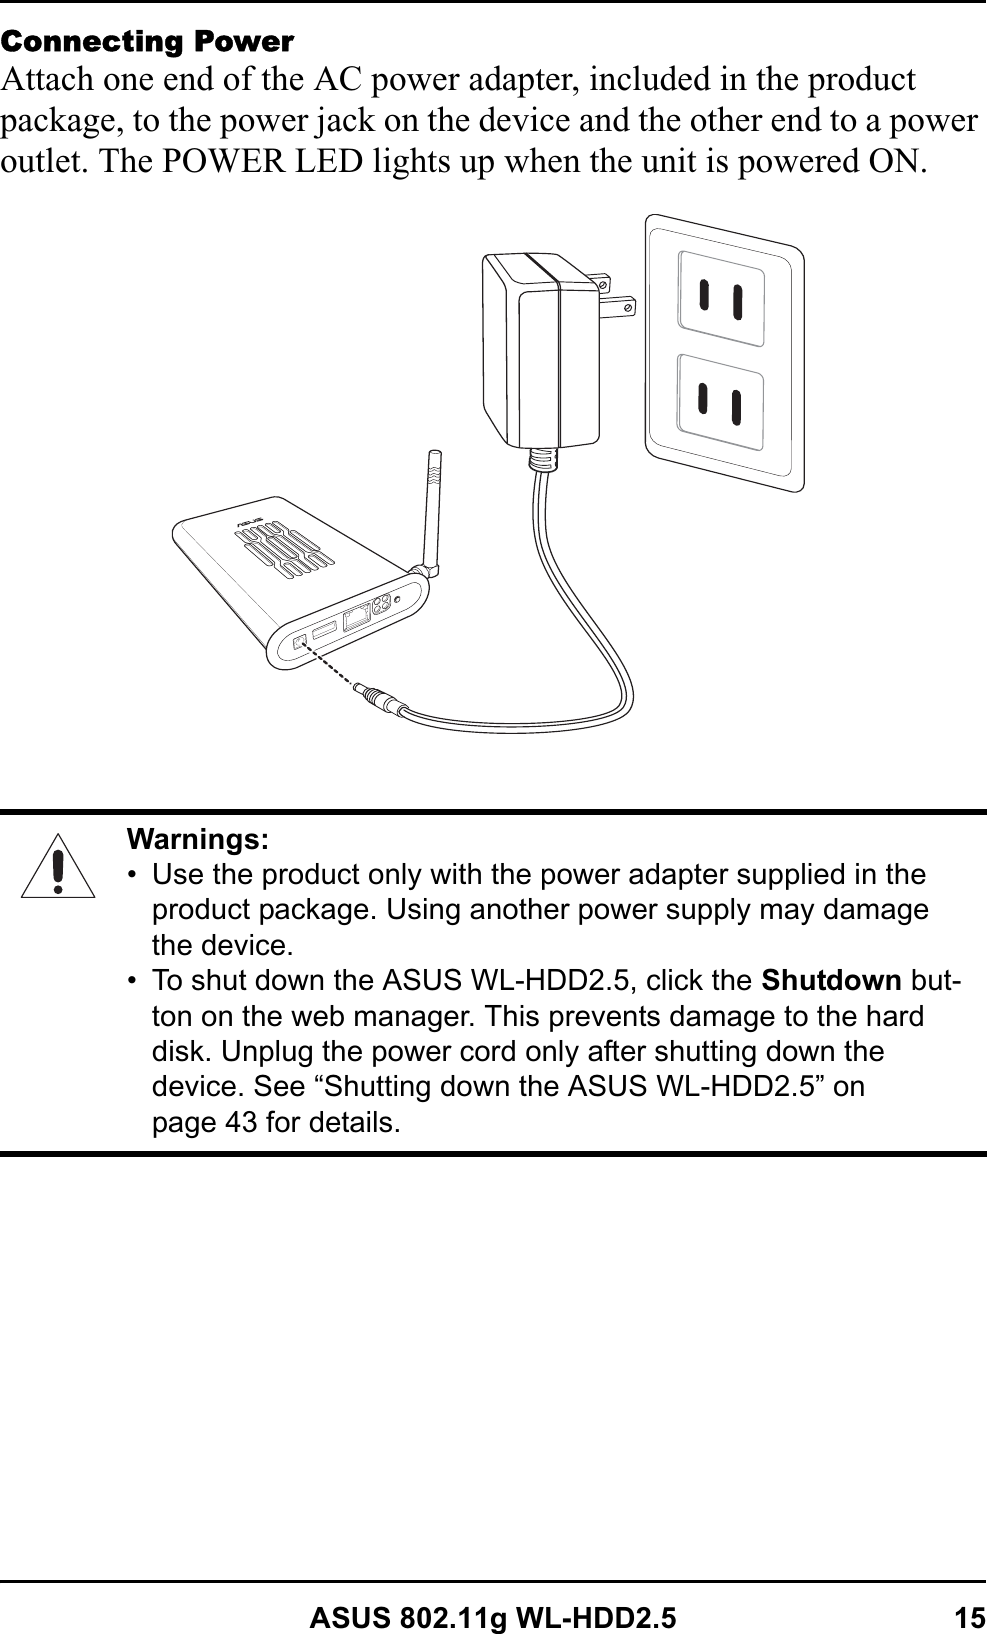 ASUS 802.11g WL-HDD2.5 15Connecting PowerAttach one end of the AC power adapter, included in the product package, to the power jack on the device and the other end to a power outlet. The POWER LED lights up when the unit is powered ON.Warnings:• Use the product only with the power adapter supplied in the product package. Using another power supply may damage the device.• To shut down the ASUS WL-HDD2.5, click the Shutdown but-ton on the web manager. This prevents damage to the hard disk. Unplug the power cord only after shutting down the device. See “Shutting down the ASUS WL-HDD2.5” on page 43 for details.